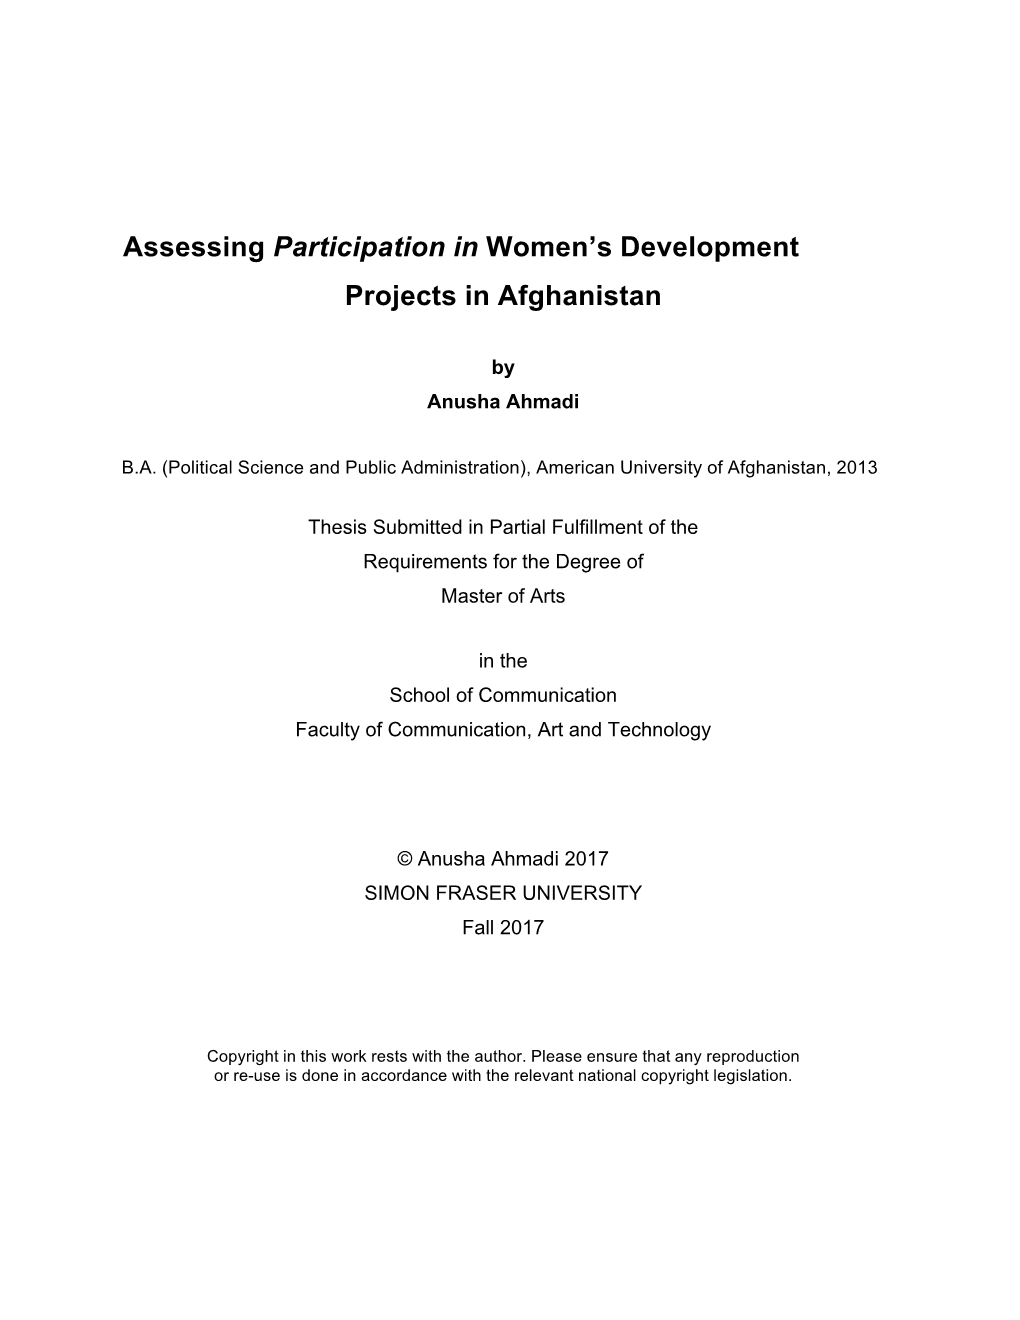 Assessing Participation in Women's Development Projects in Afghanistan